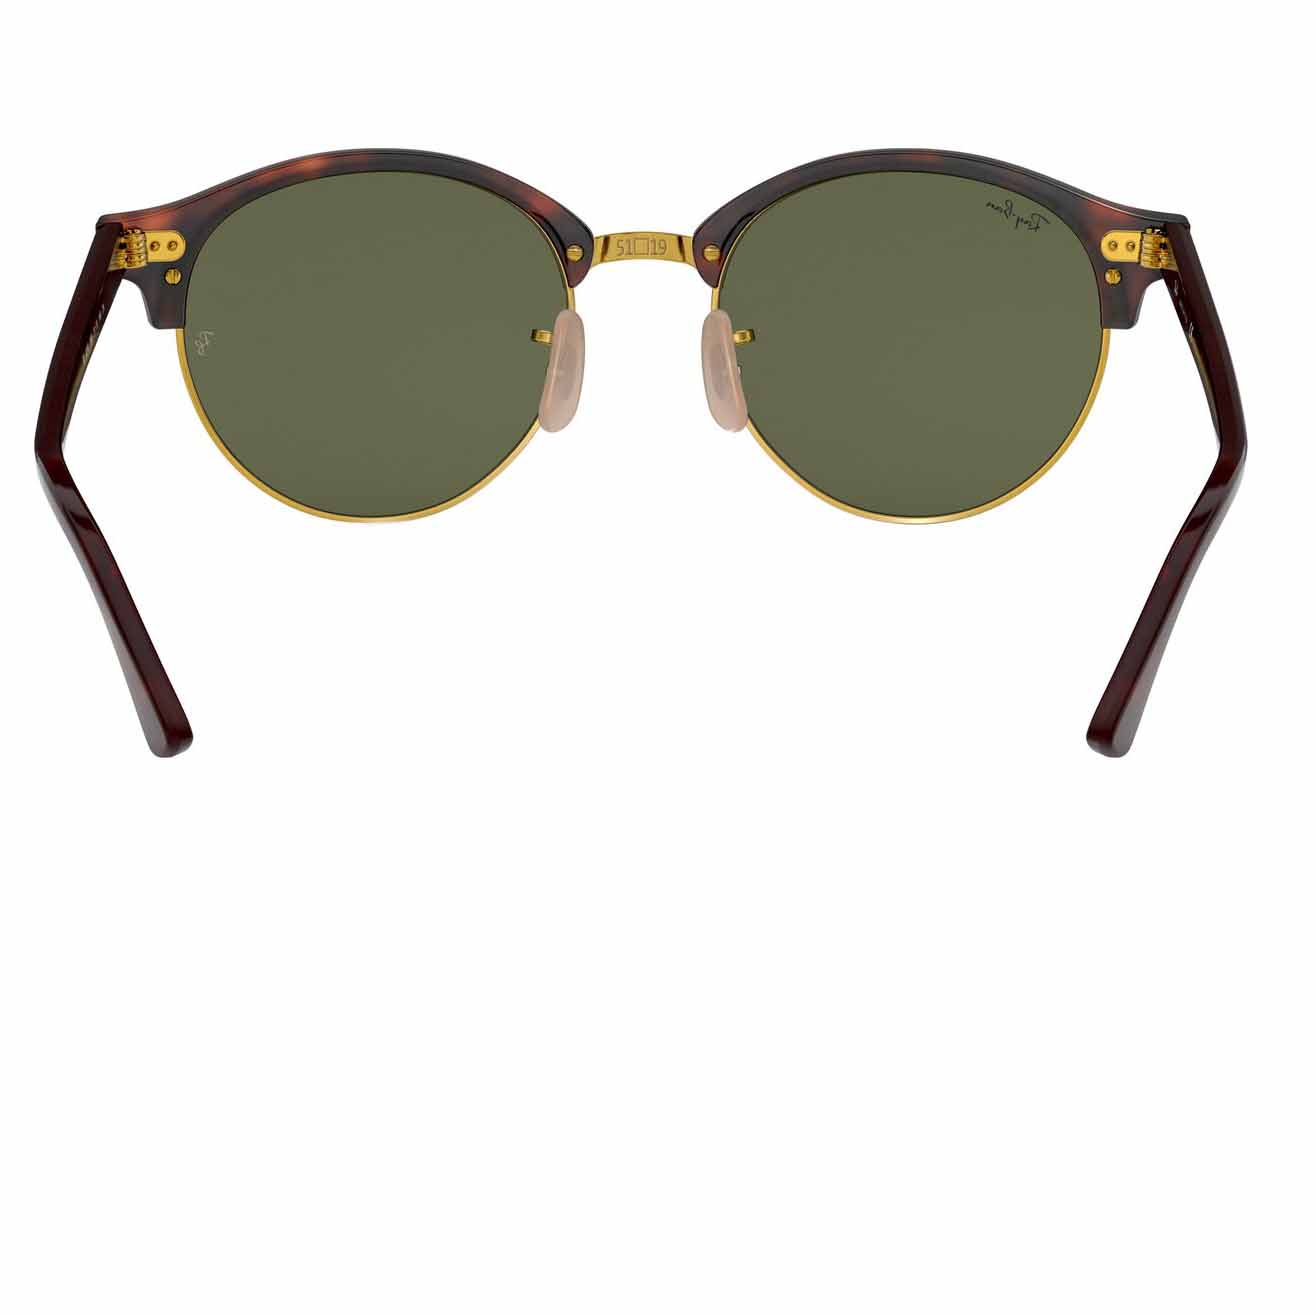 Co Ray-Ban TOX Sunglasses CLUBROUND RB4246 990 51 RED HAVANA/G-15 GREEN